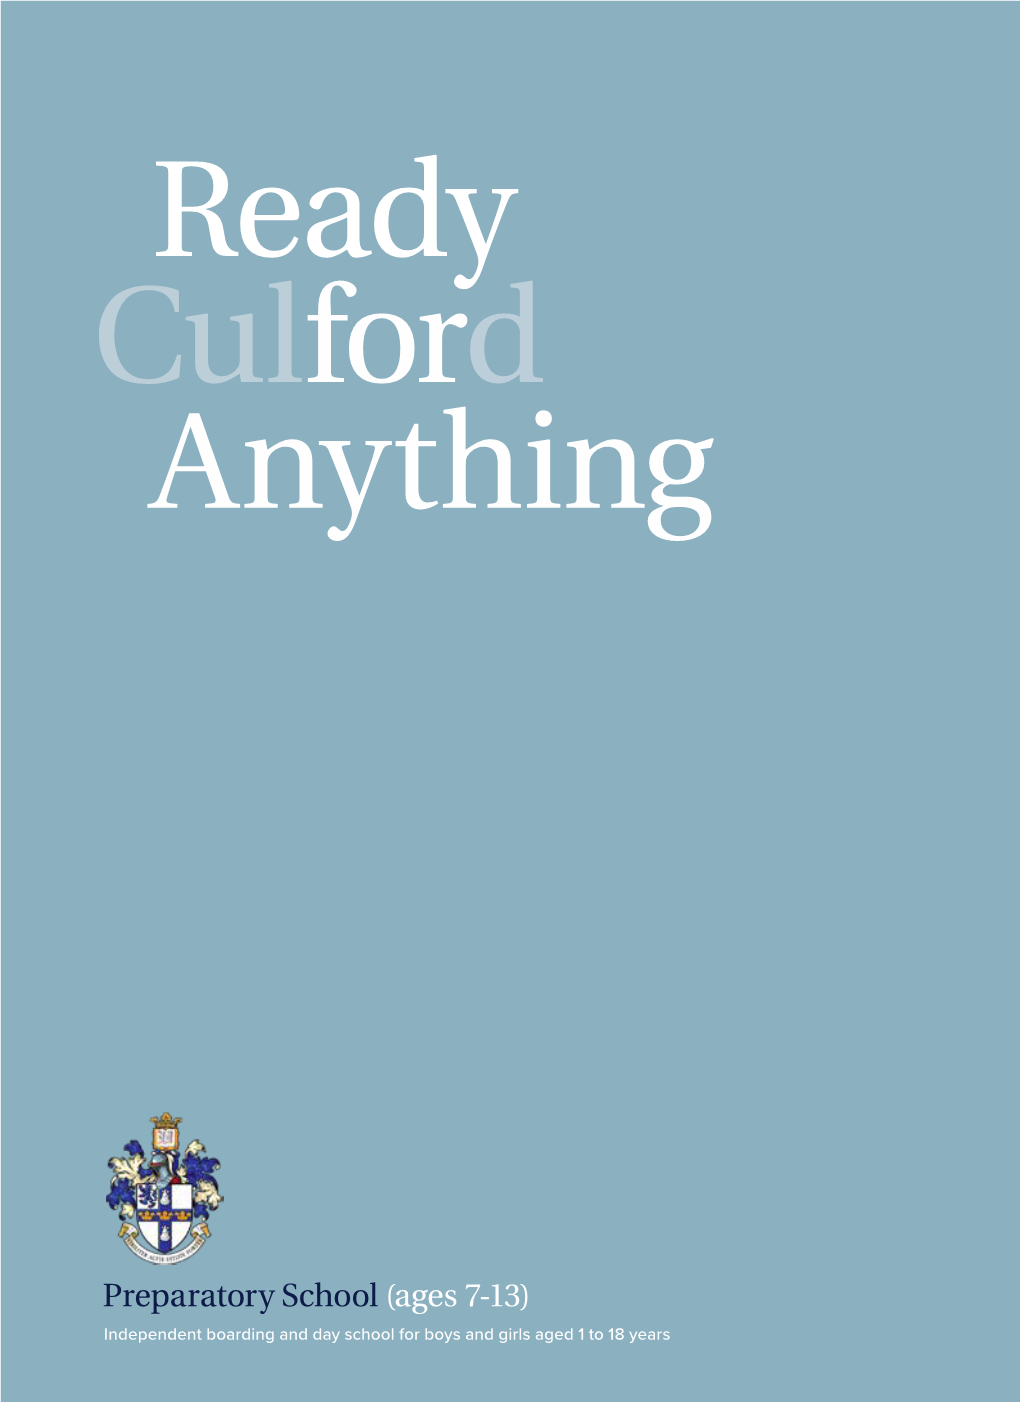 Preparatory School (Ages 7-13) Independent Boarding and Day School for Boys and Girls Aged 1 to 18 Years CULFORD PREPARATORY SCHOOL READY for ANYTHING